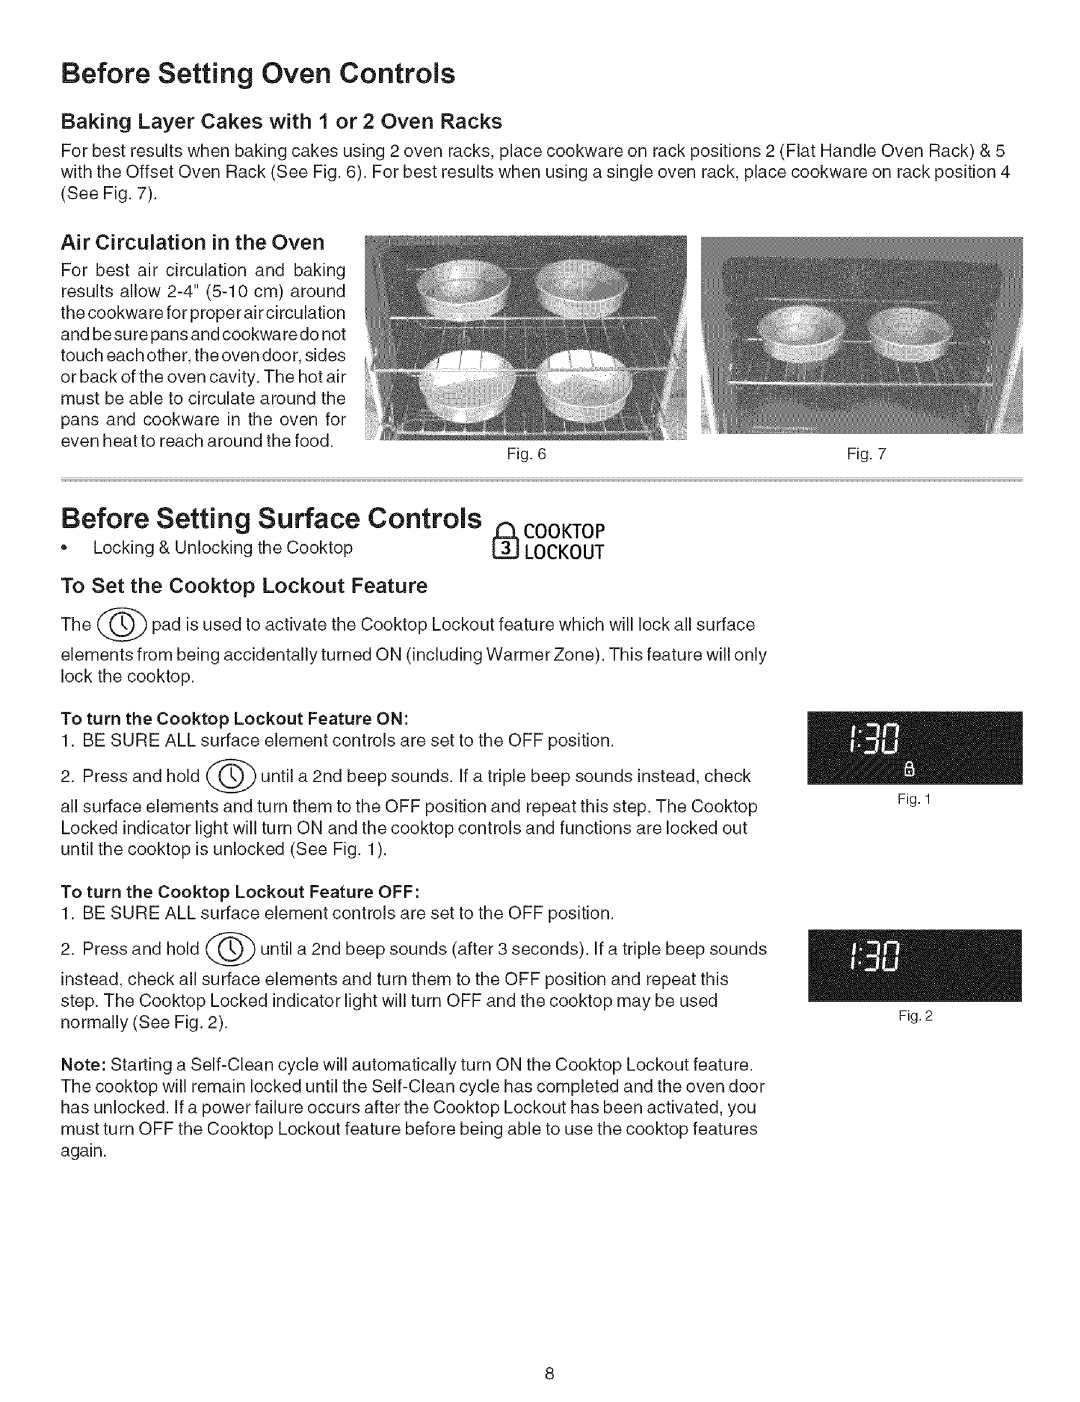 Kenmore 790.9659 manual Before Setting Oven Controls, Surface Controls, To Set the Cooktop Lockout Feature 